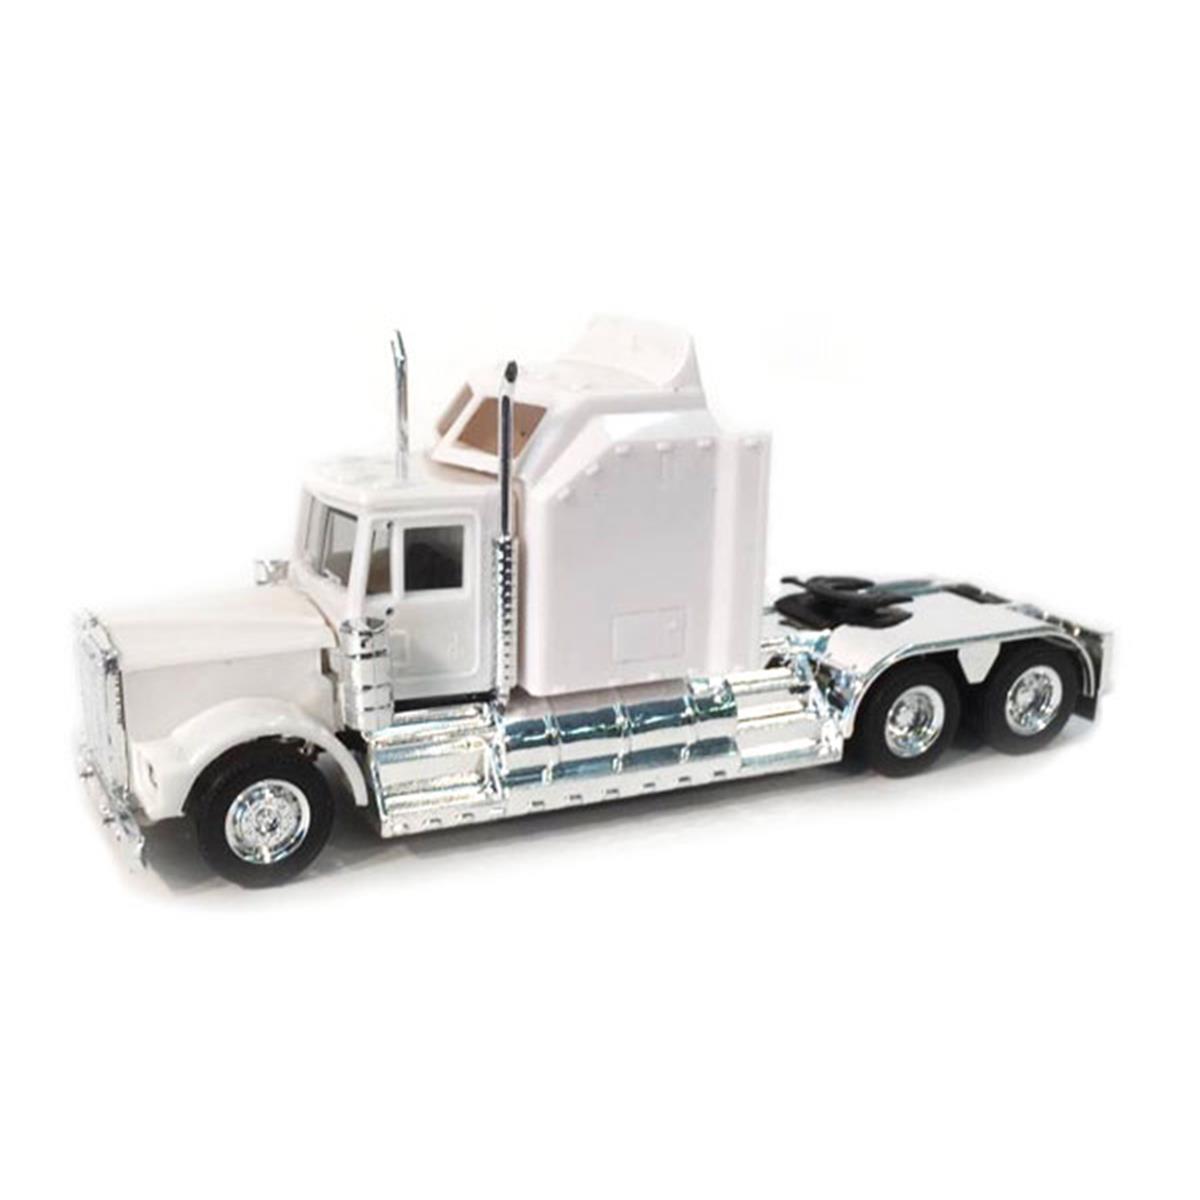 Pro035234 All Or Mostly Plastic Kenworth W900 Truck Toys With Extra Large Sleeper In White, 14 Years Above